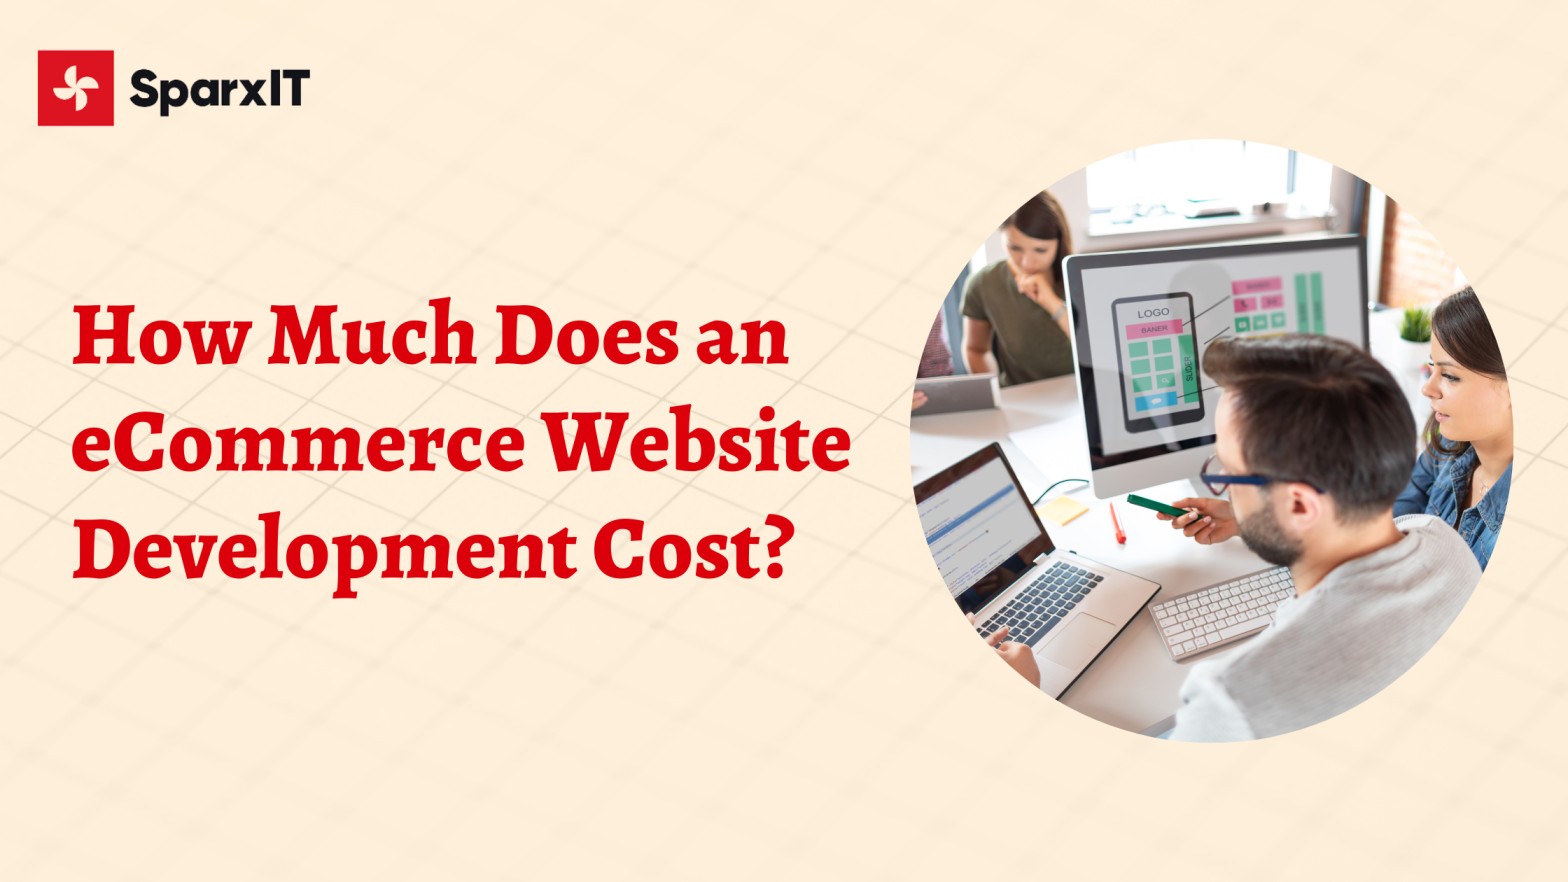 How Much Does an eCommerce Website Development Cost?